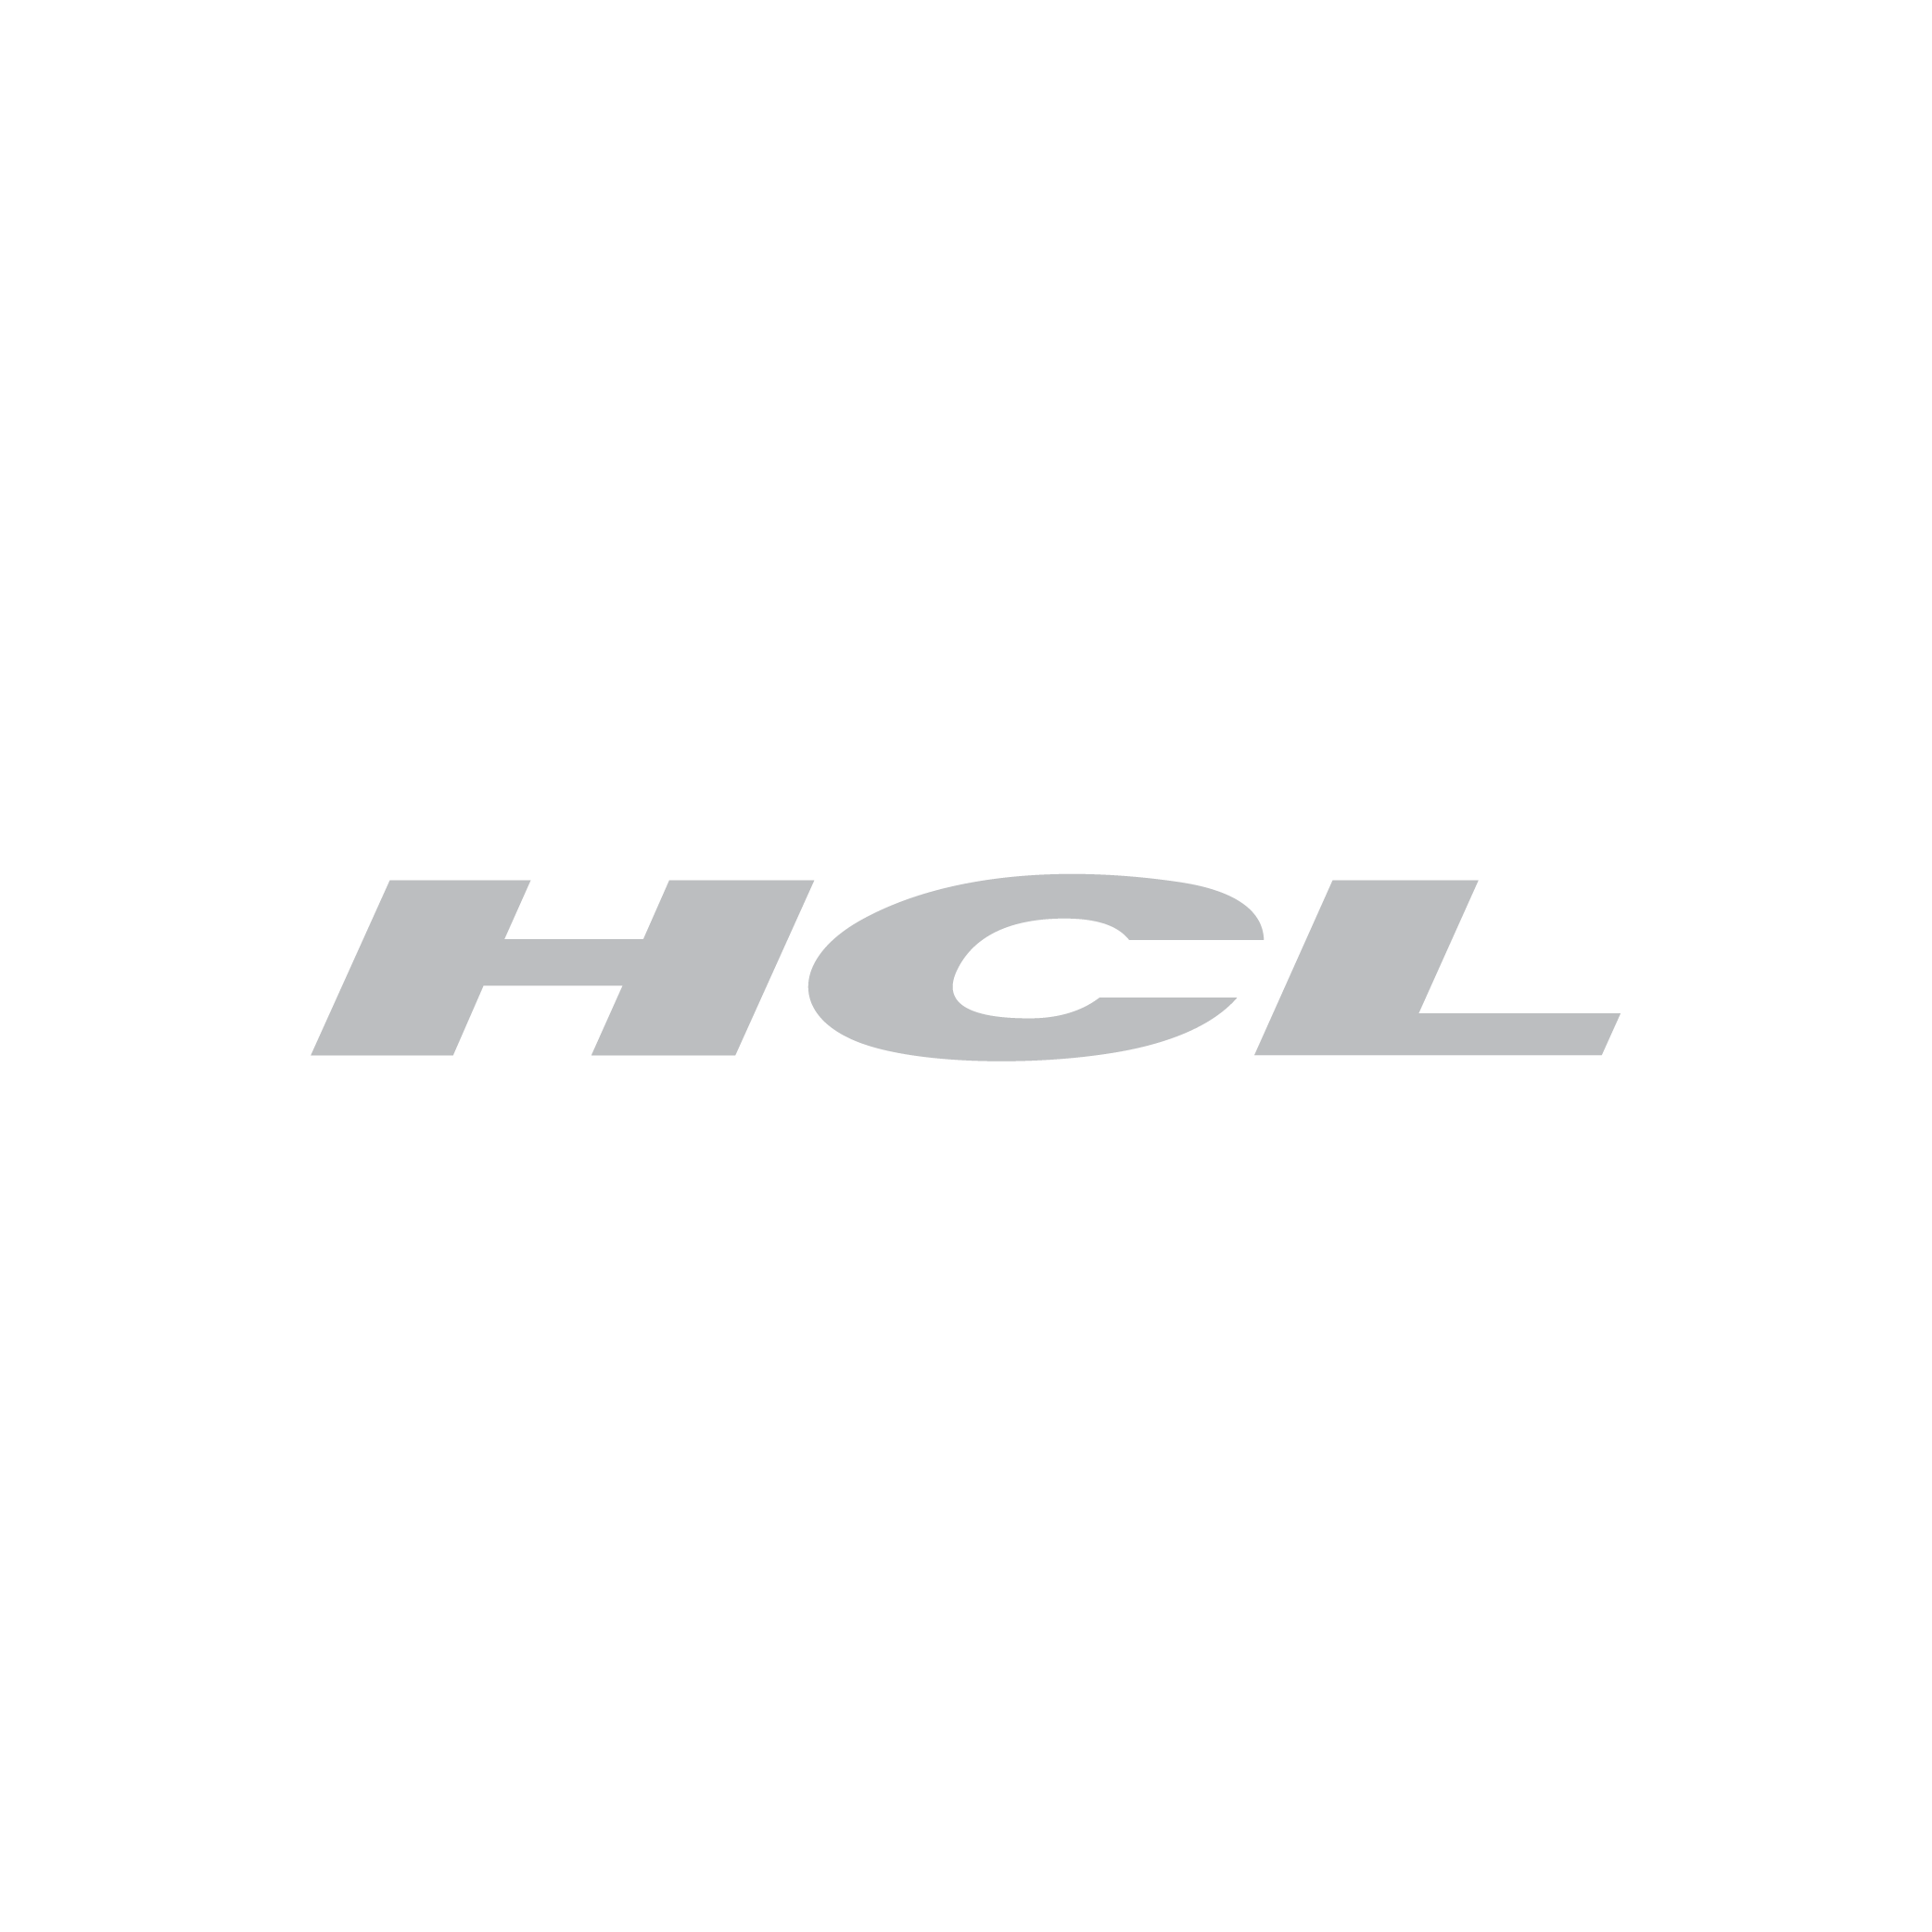 hcl_gray-01.png